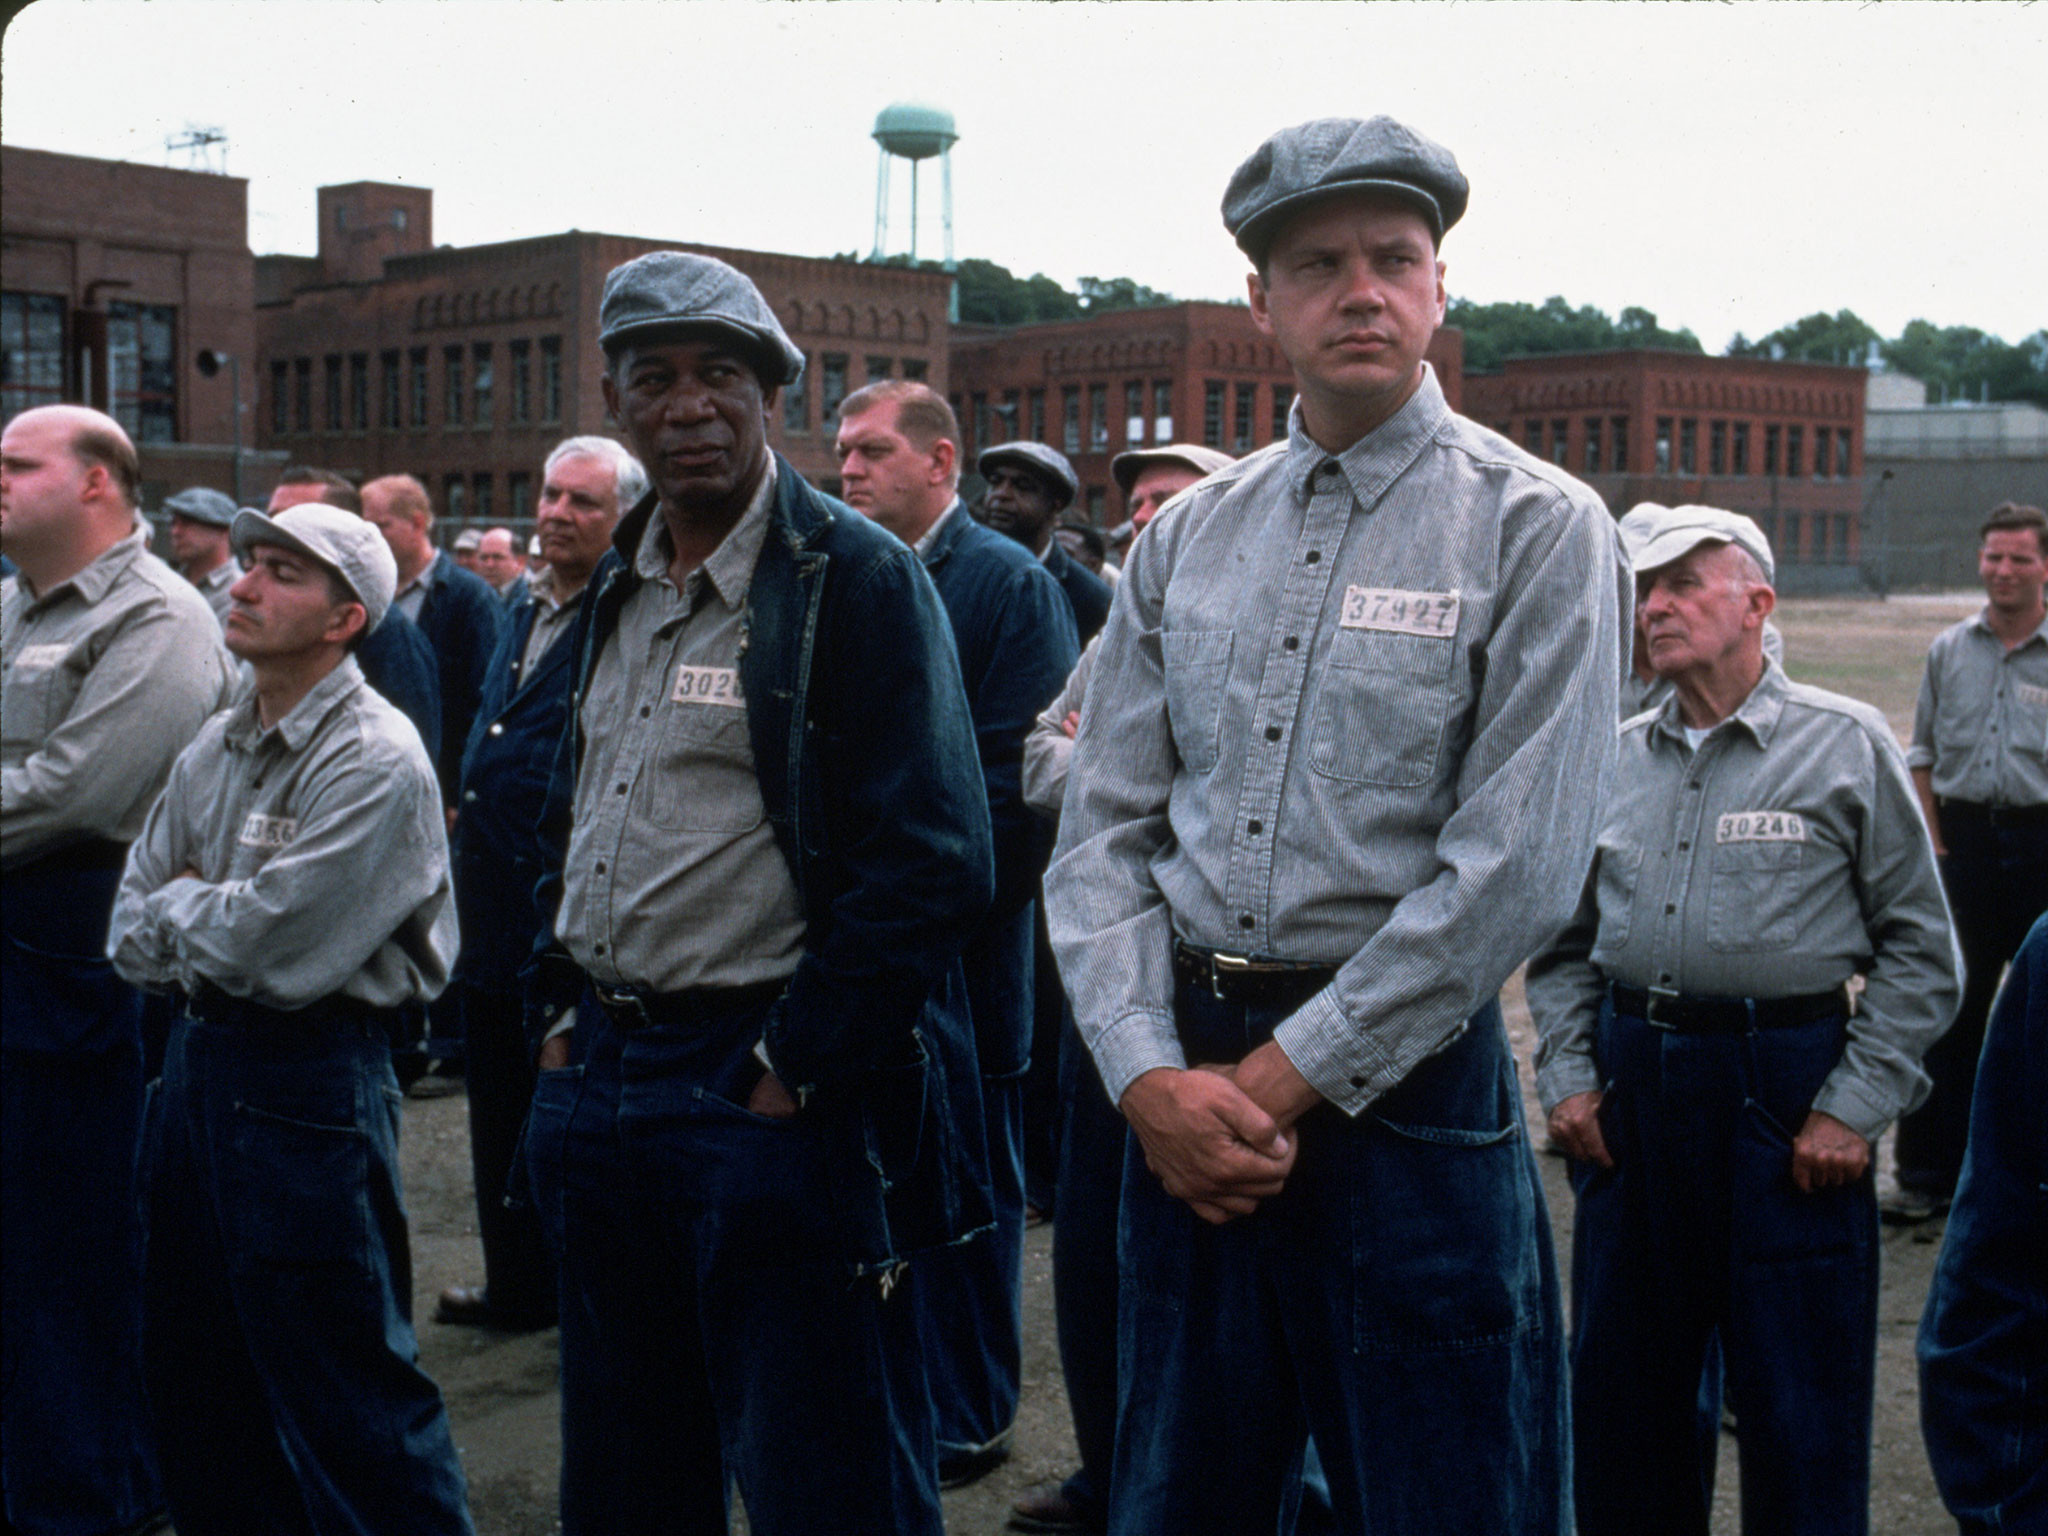 2048x1536 The Shawshank Redemption prison set to open as all year round tourist  attraction | The Independent